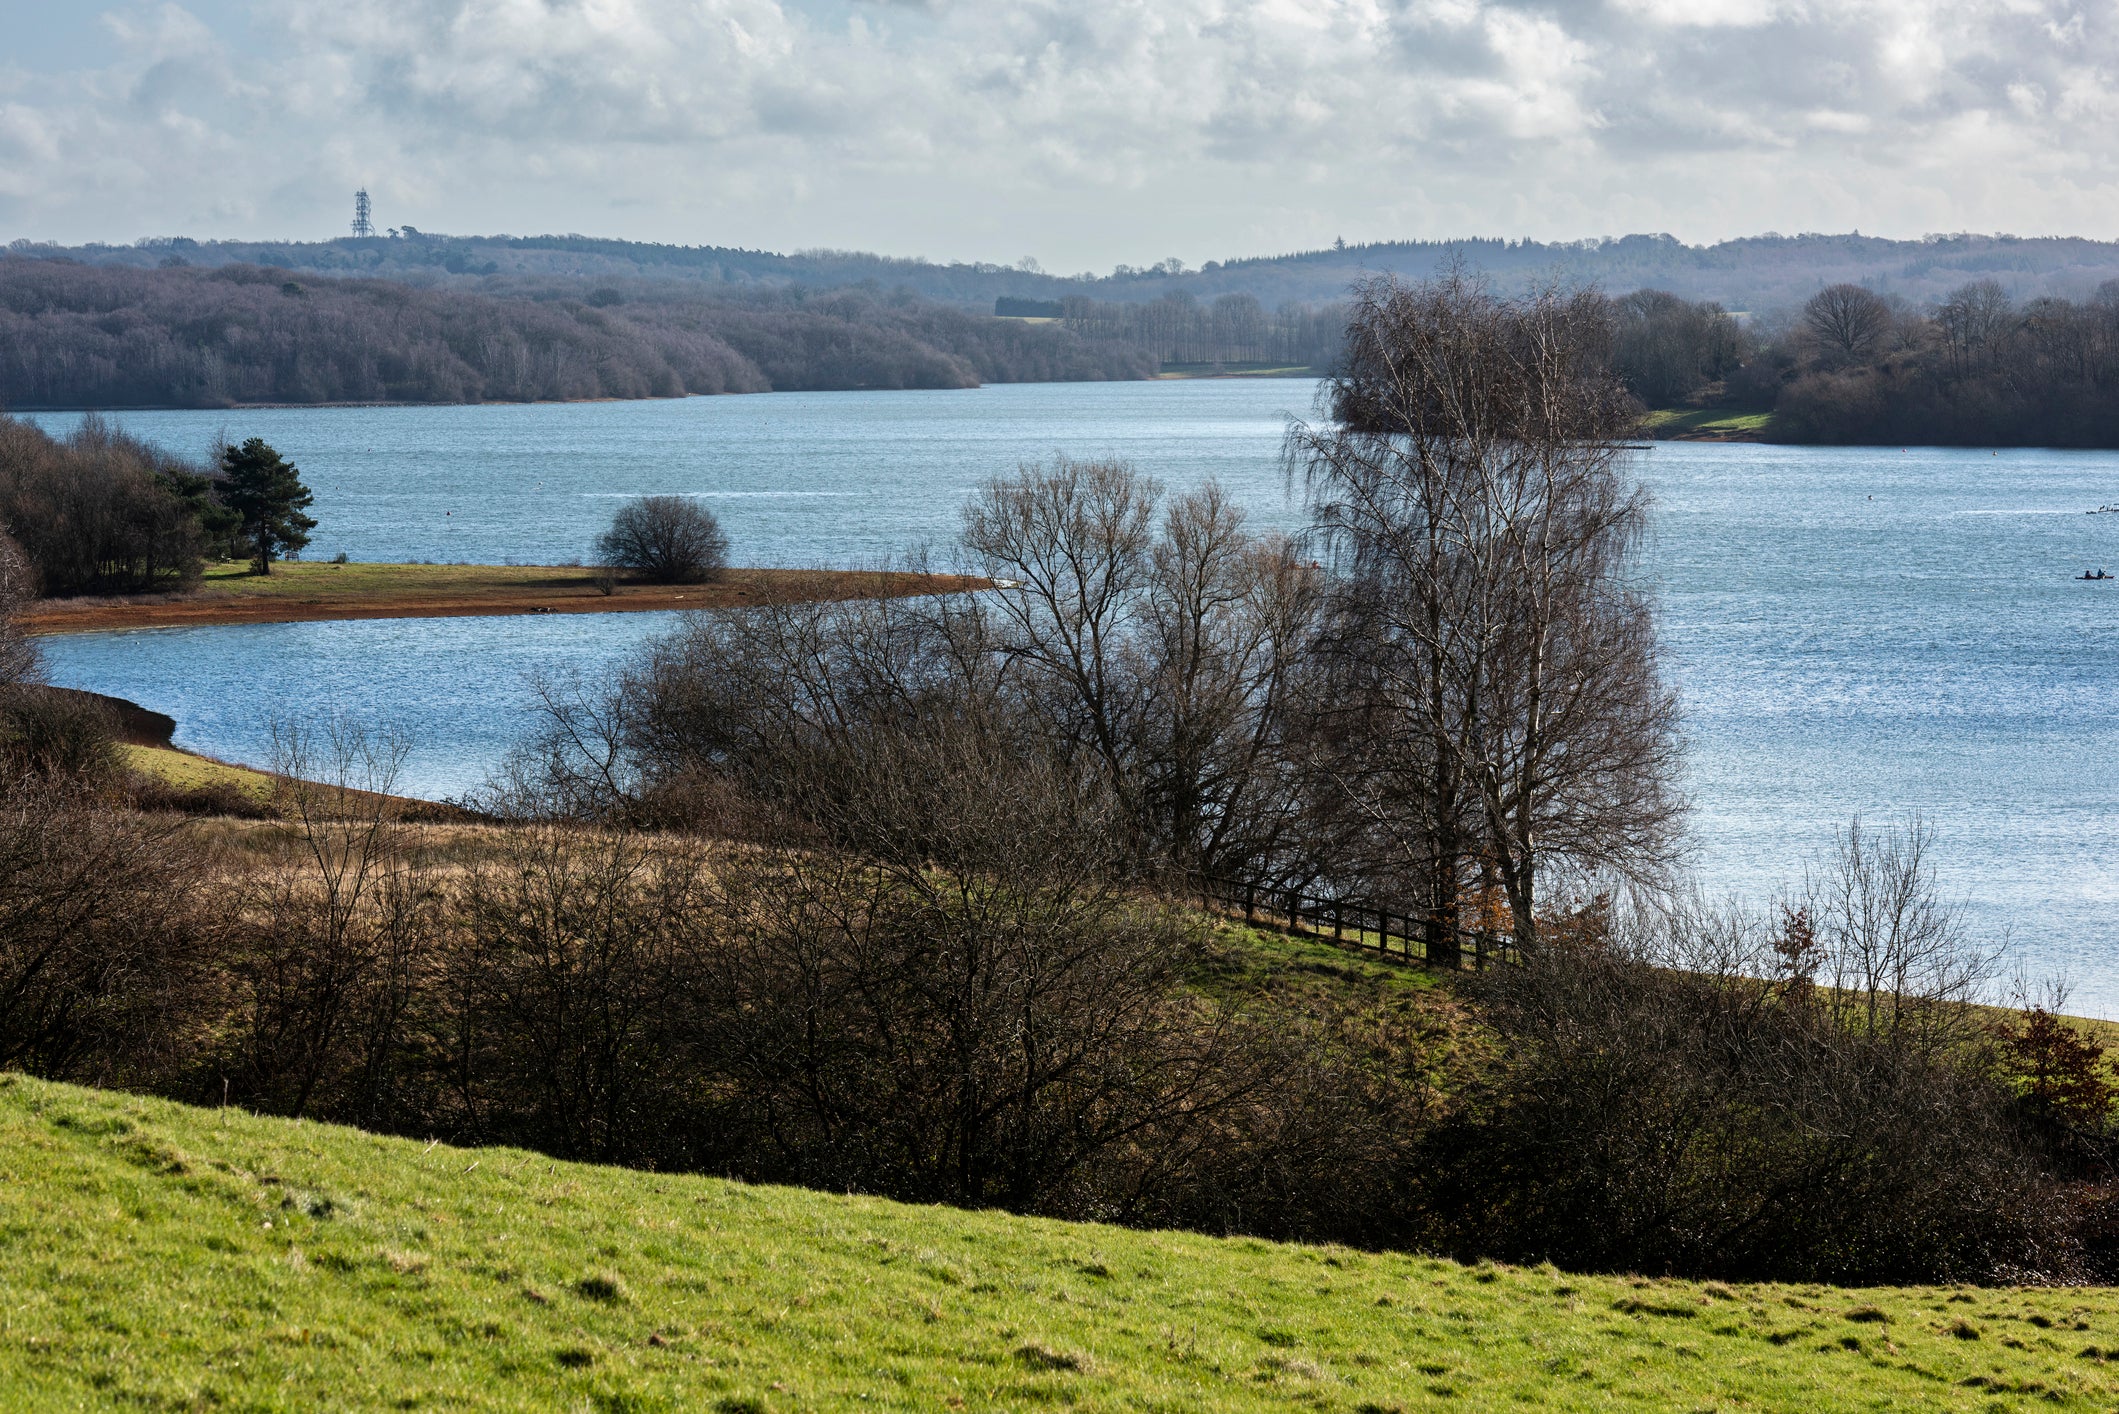 How Bewl Water normally looks